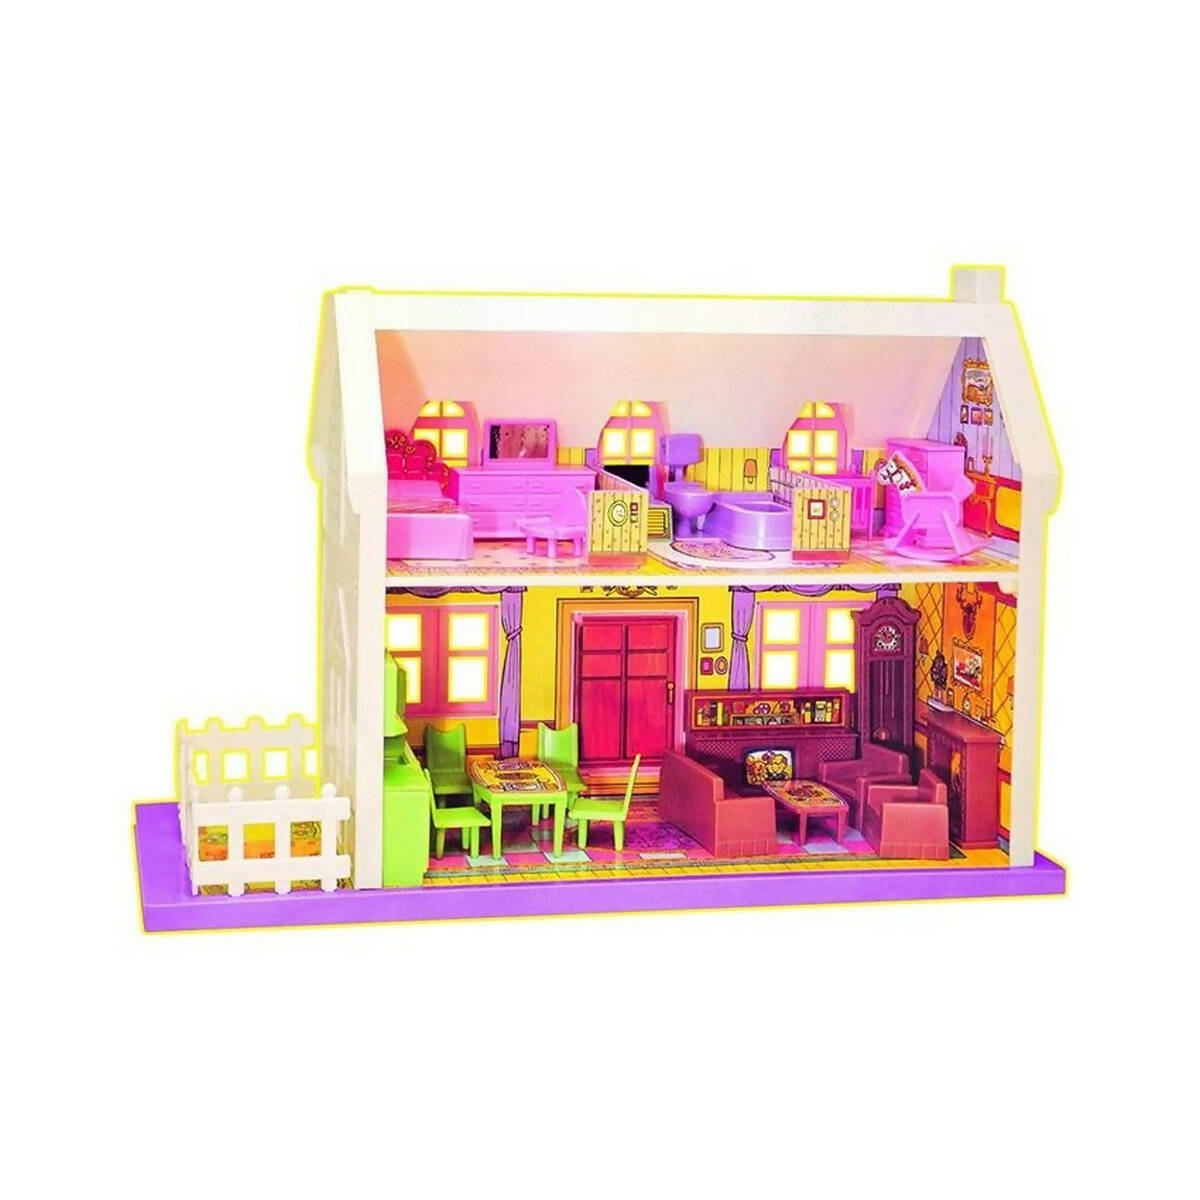 Big Country Doll House - Pink